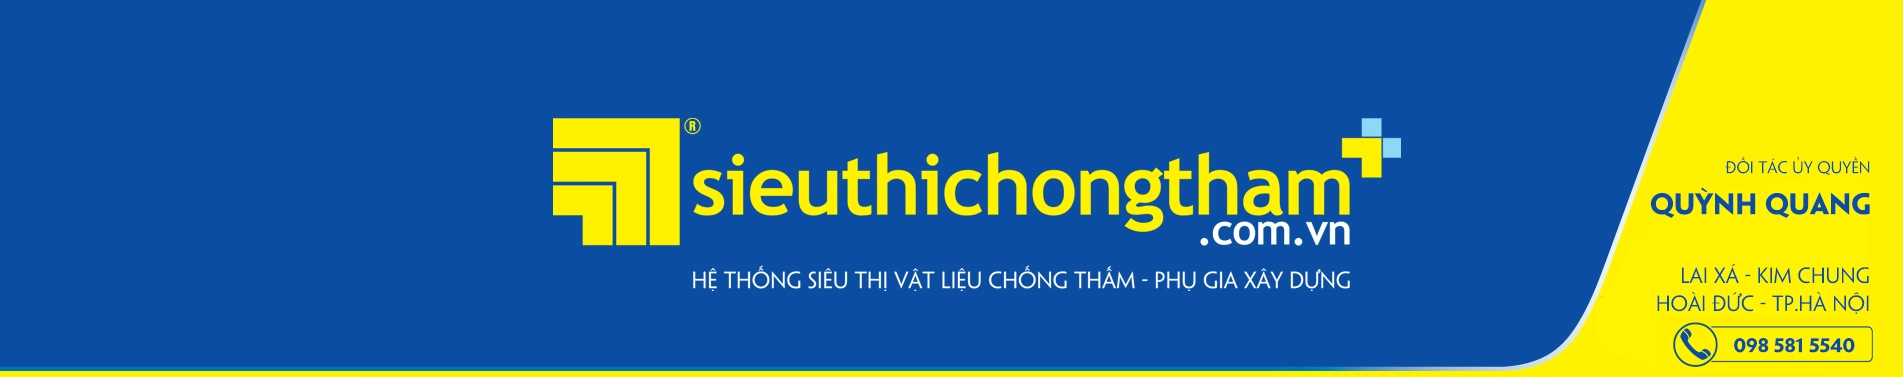 Quynh Quang Banner